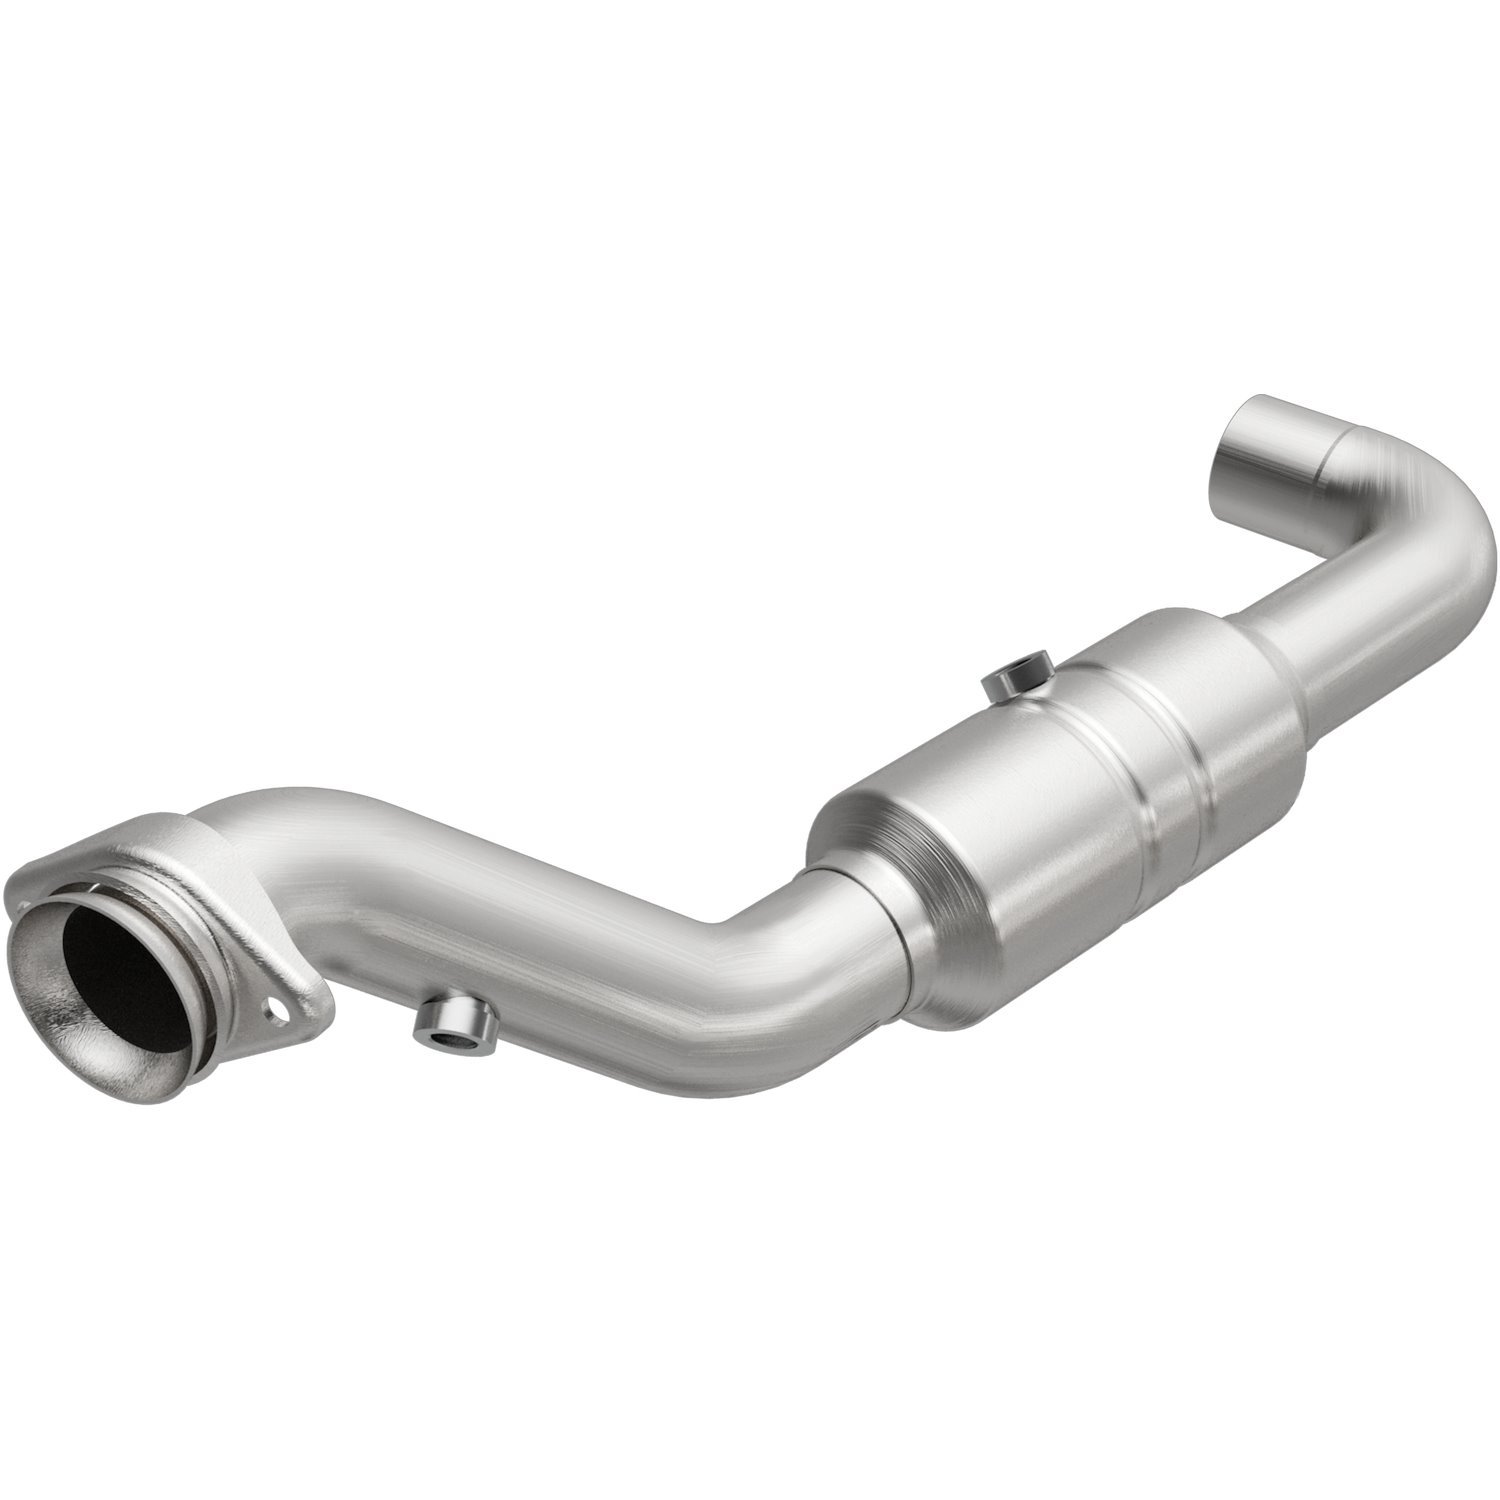 OEM Grade Federal / EPA Compliant Direct-Fit Catalytic Converter 52428